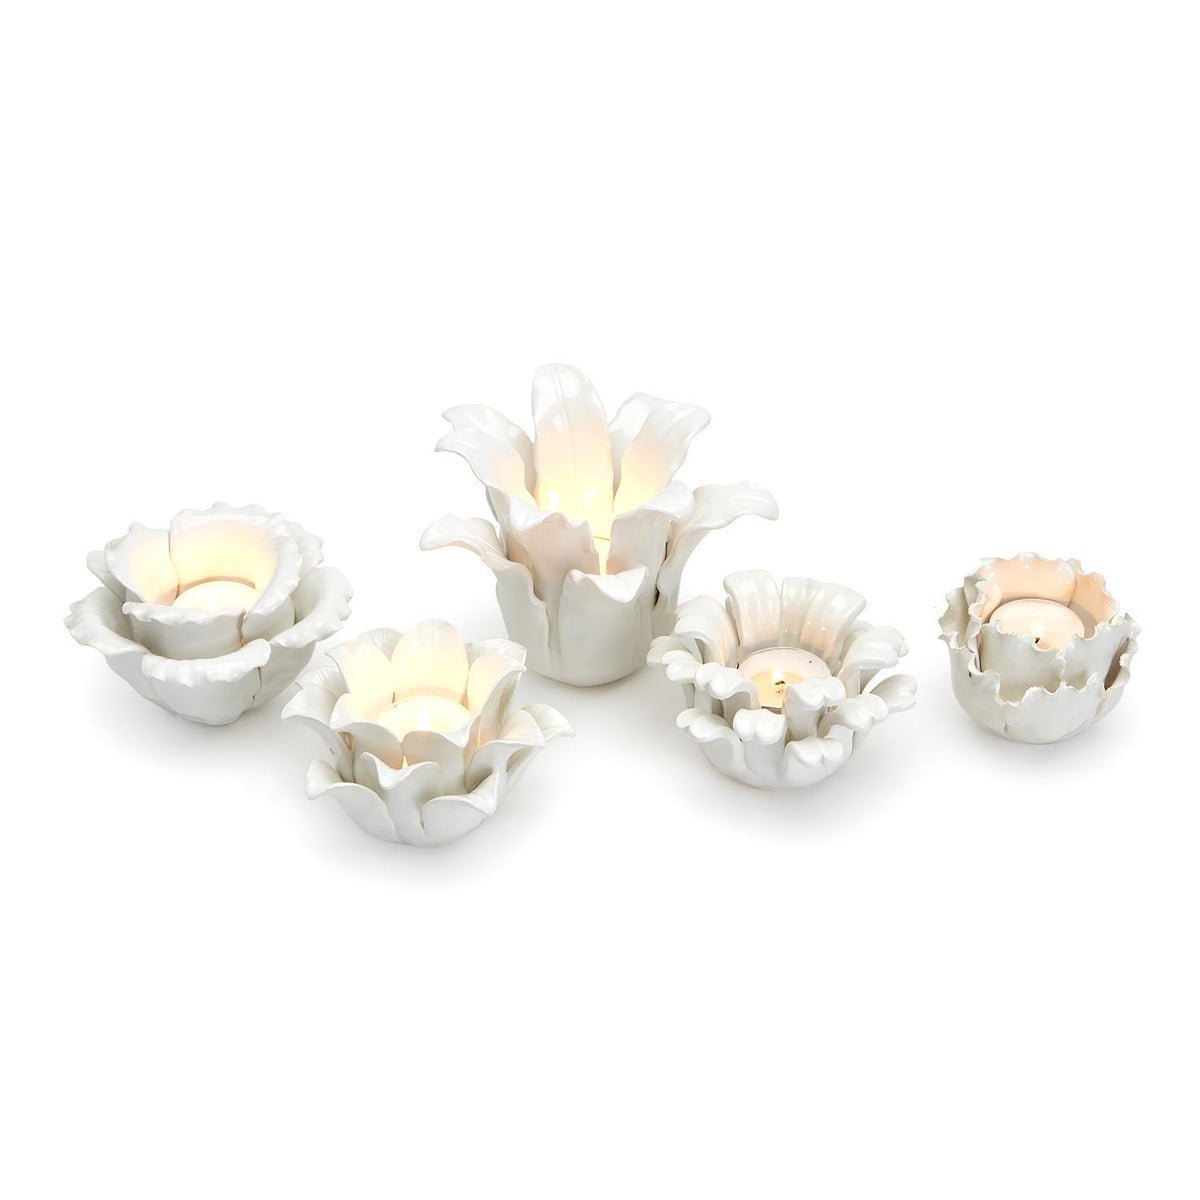 White Succulents Hand-Crafted Tea Light Candleholders in 5 Styles--Lemons and Limes Boutique